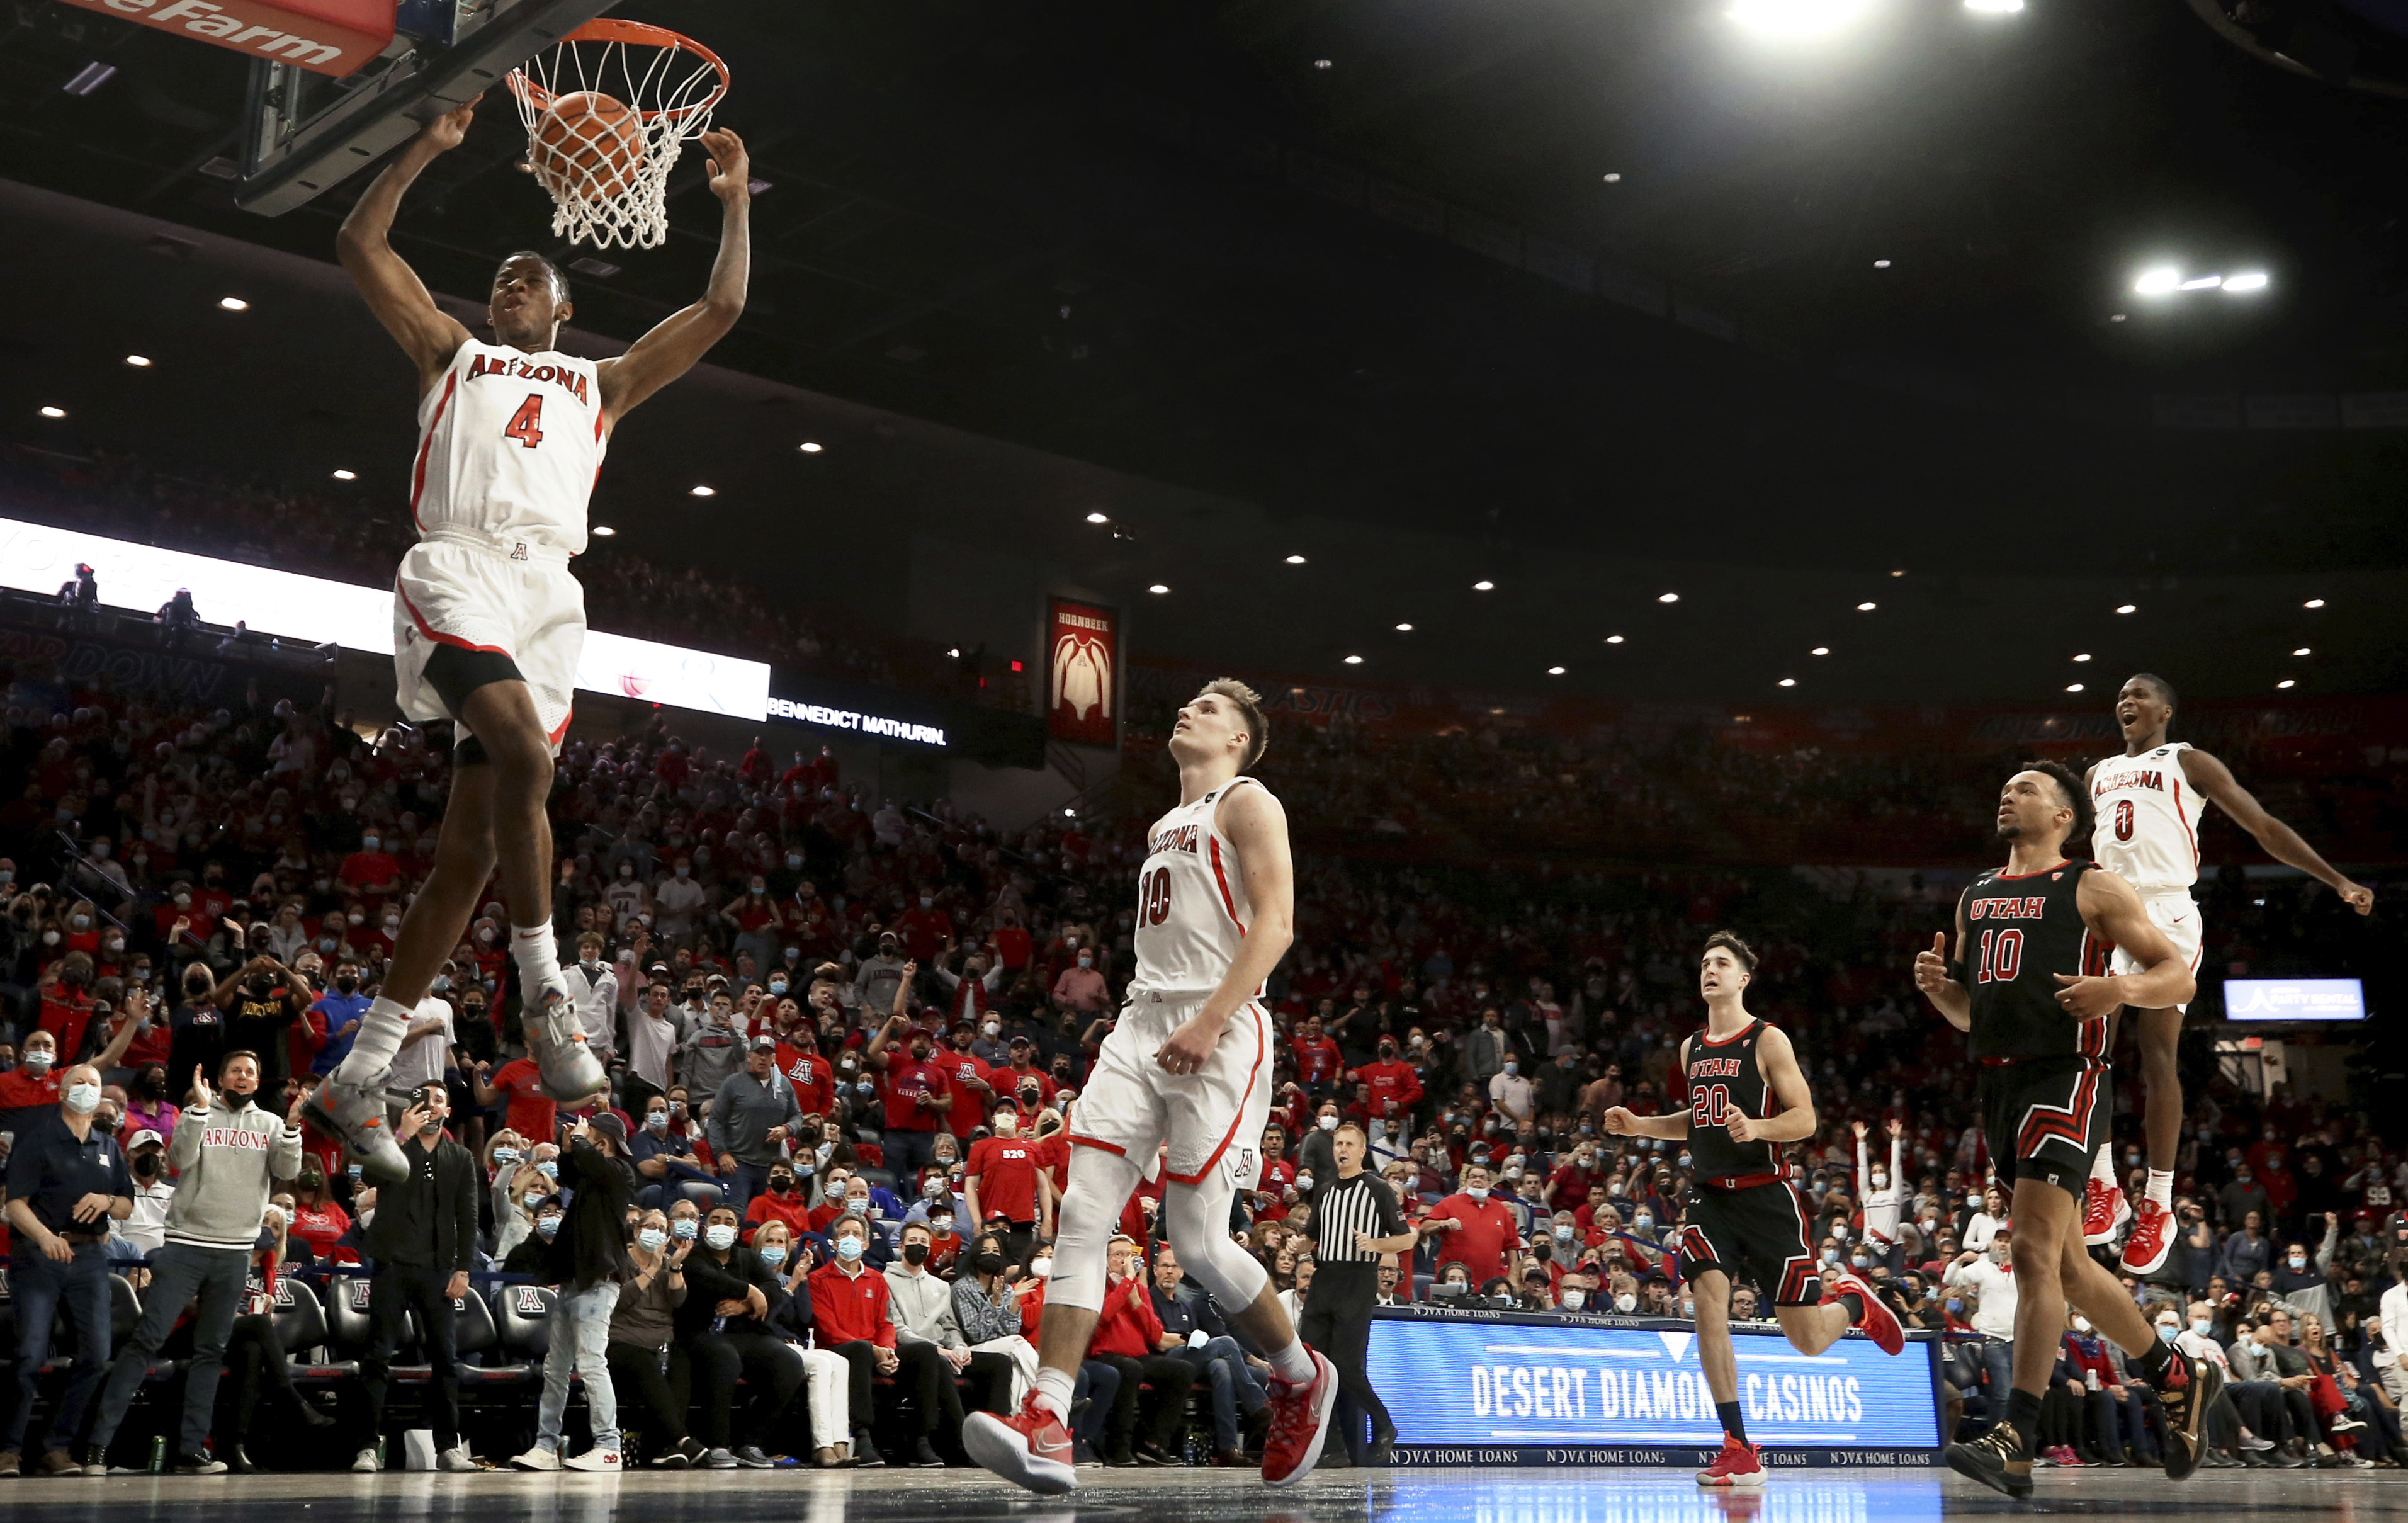 Arizona guard Dalen Terry (4) finishes off his steal with a dunk against Utah